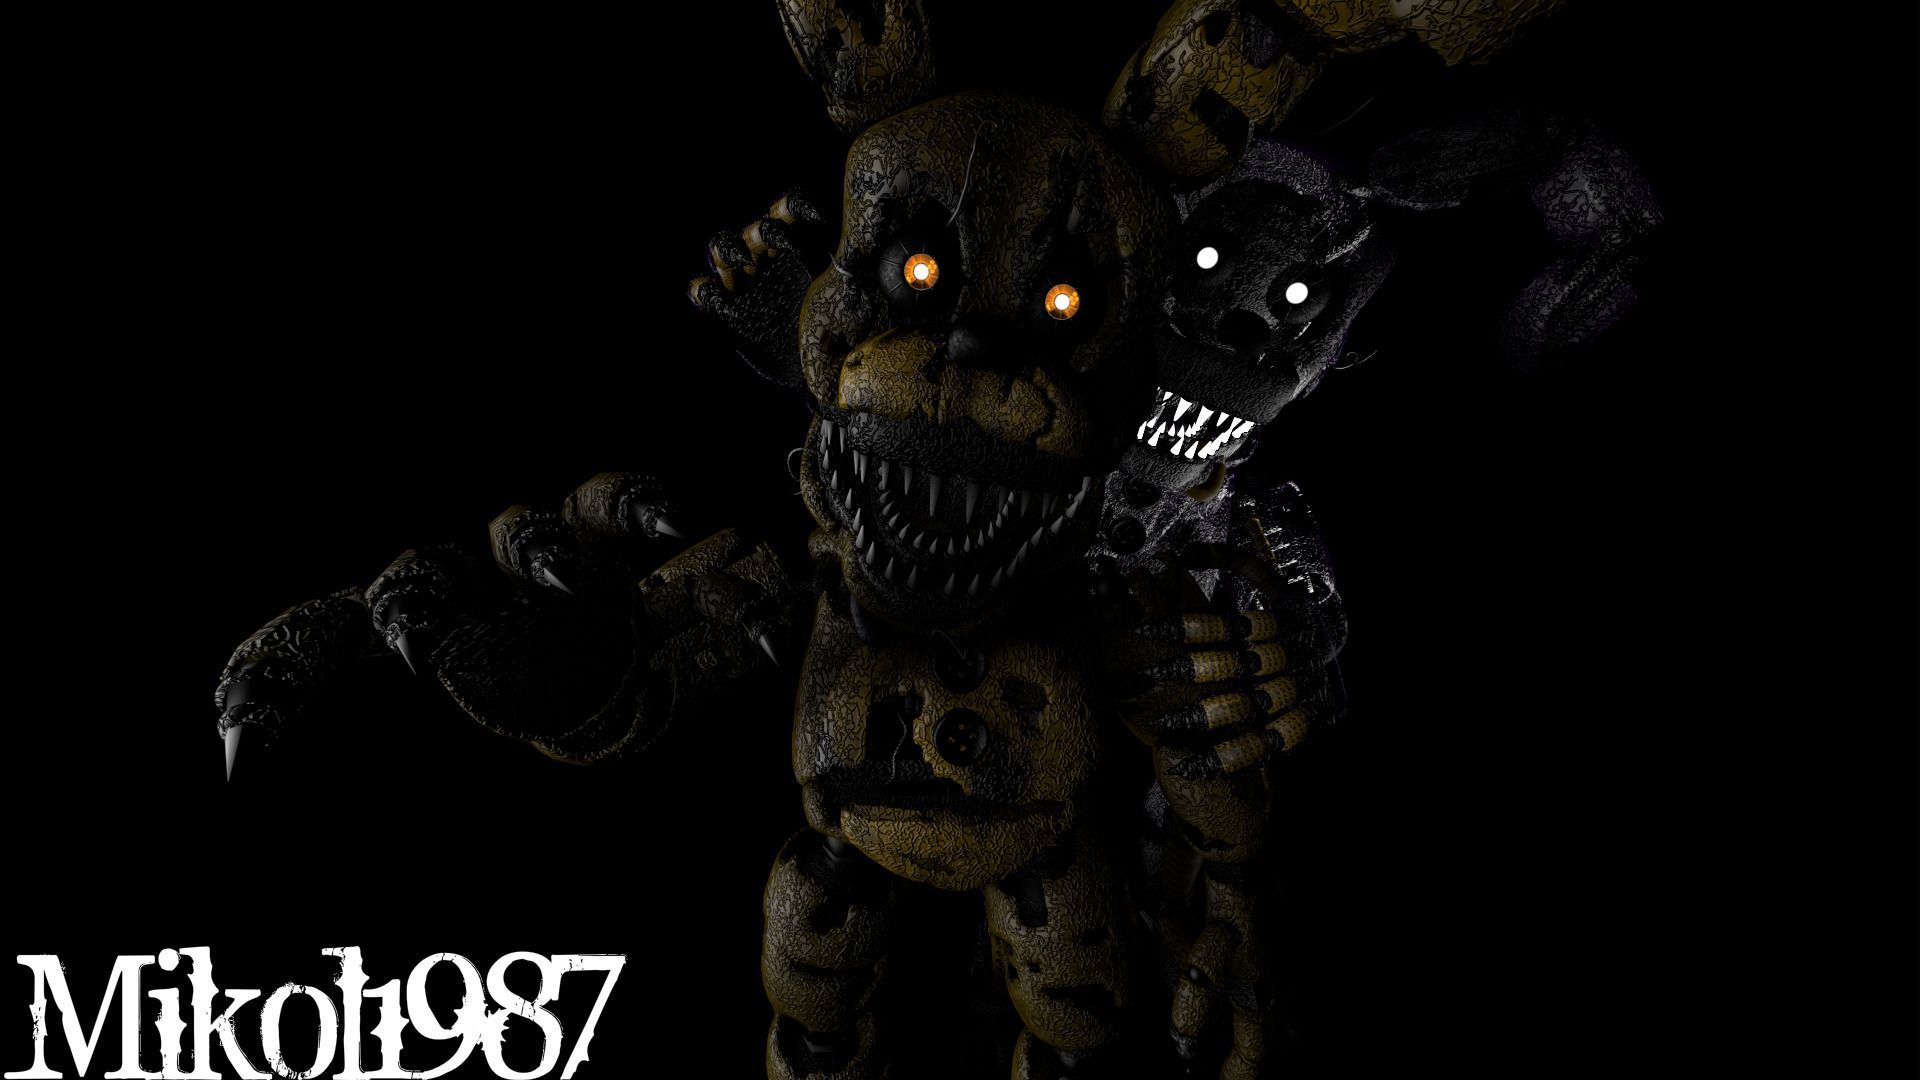 FNaF SFM: Even your nightmares have a shadow